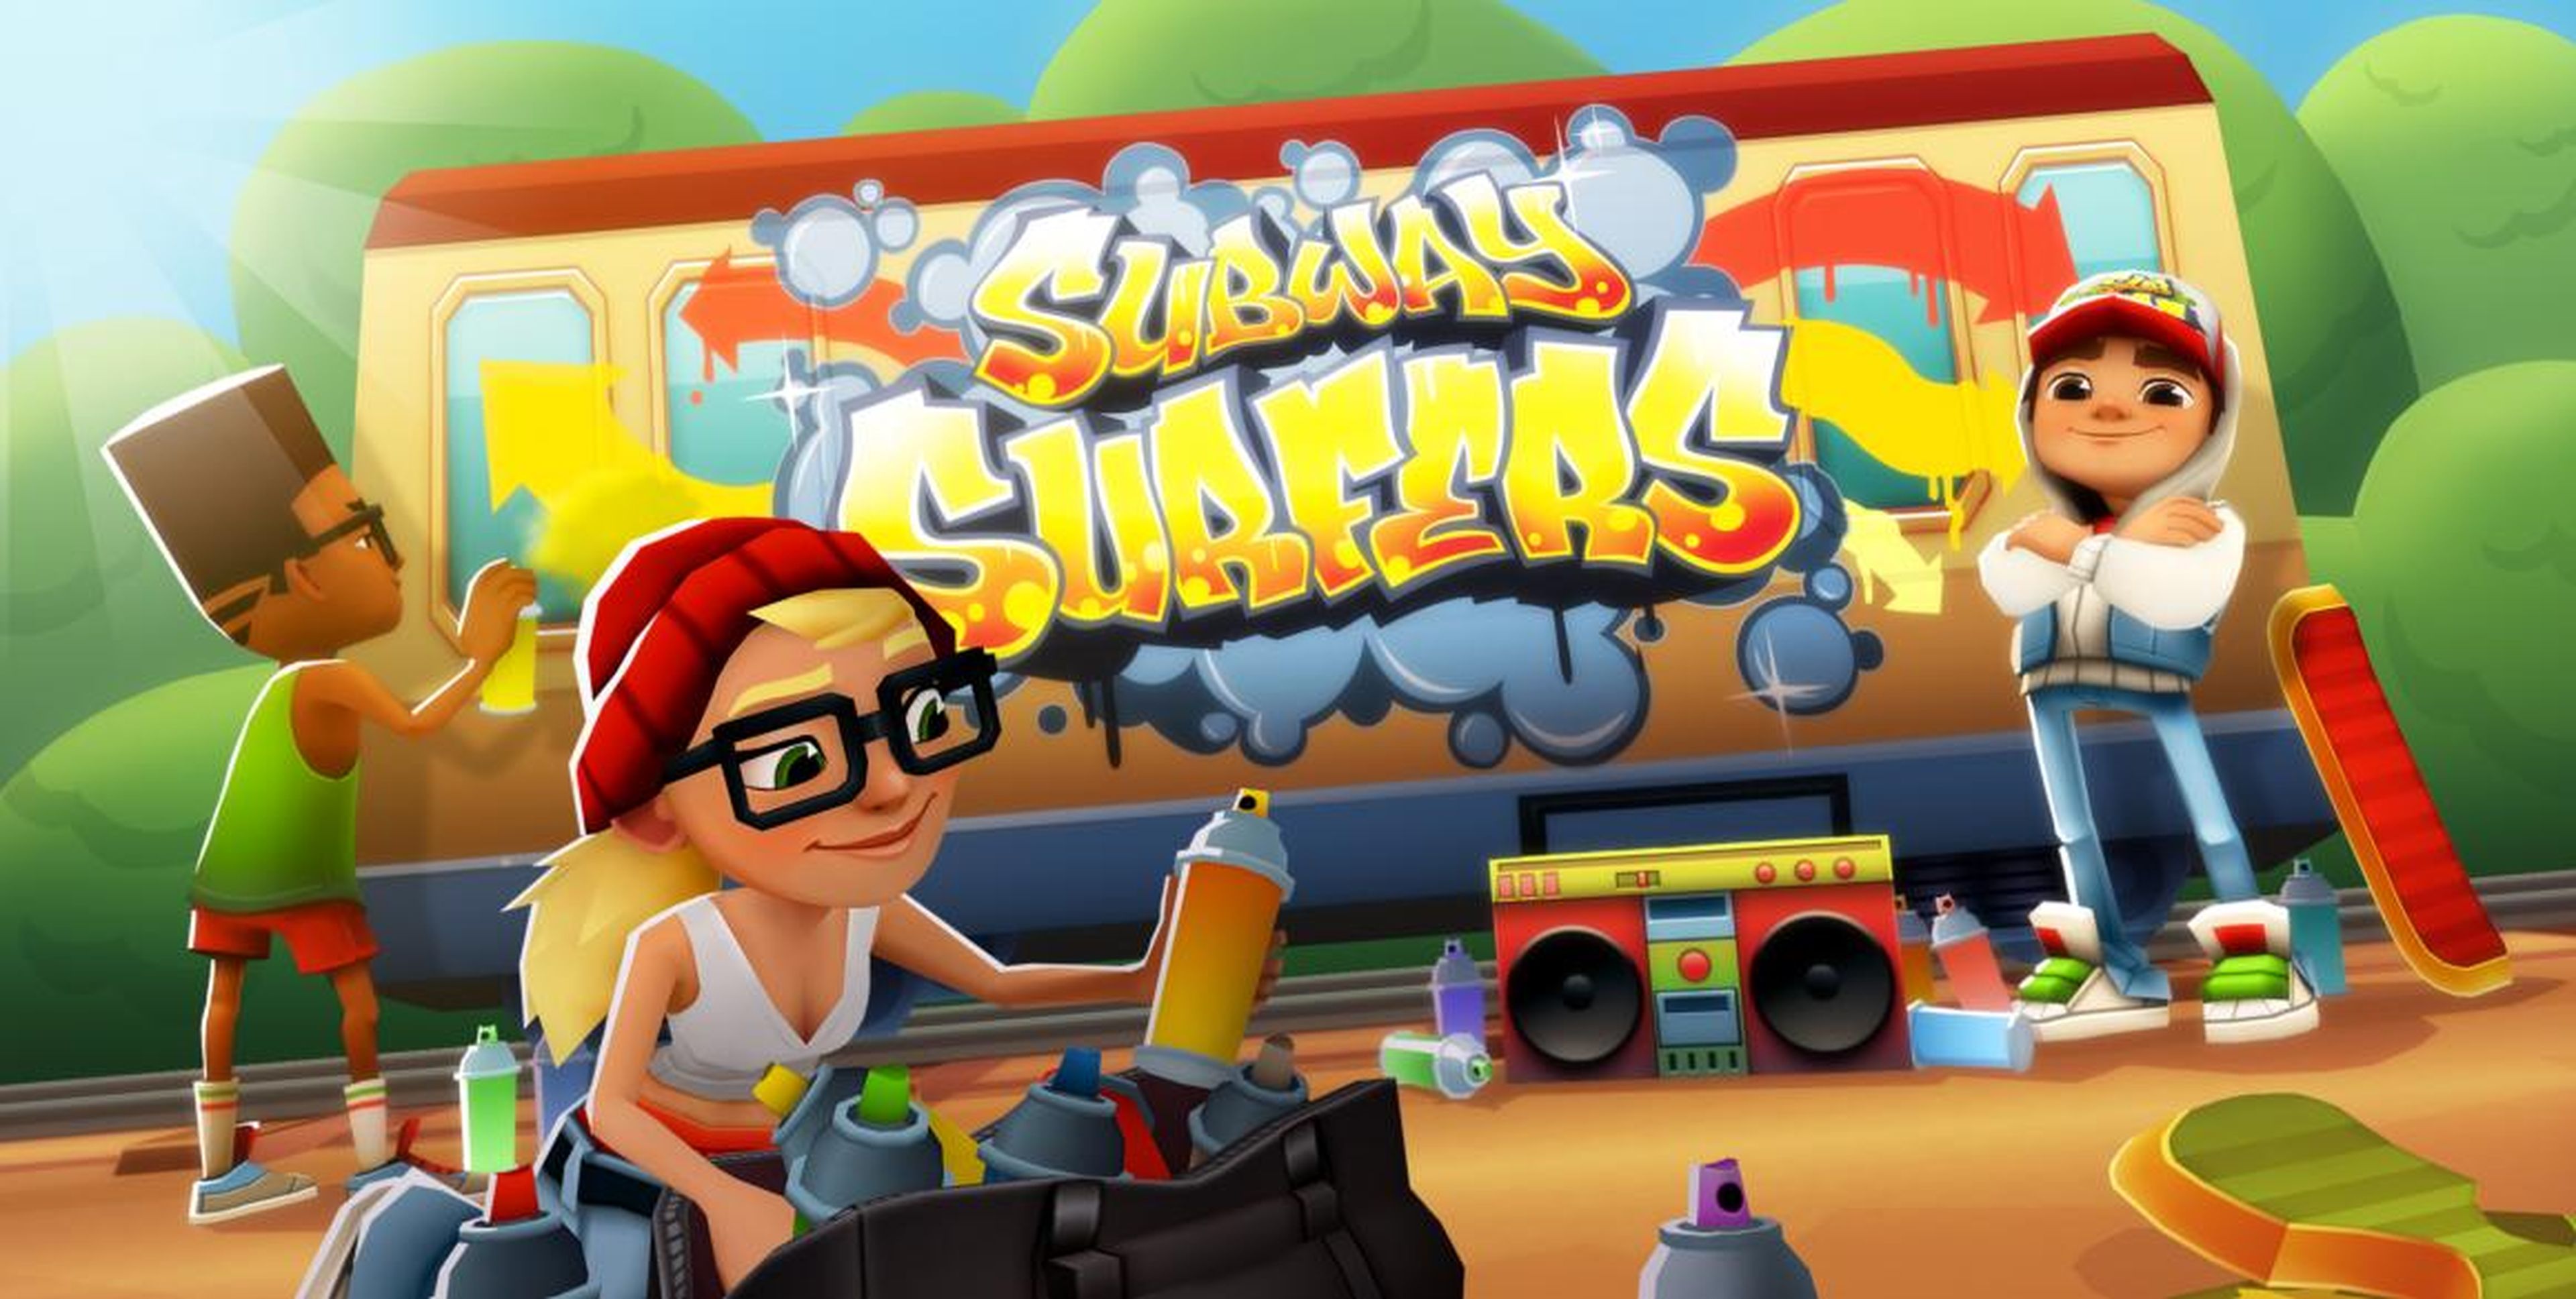 "Subway Surfers" is a fast-paced running game about adorable urban vandals. Mobile gamers played this one for 2.43 billion hours over the period in question.